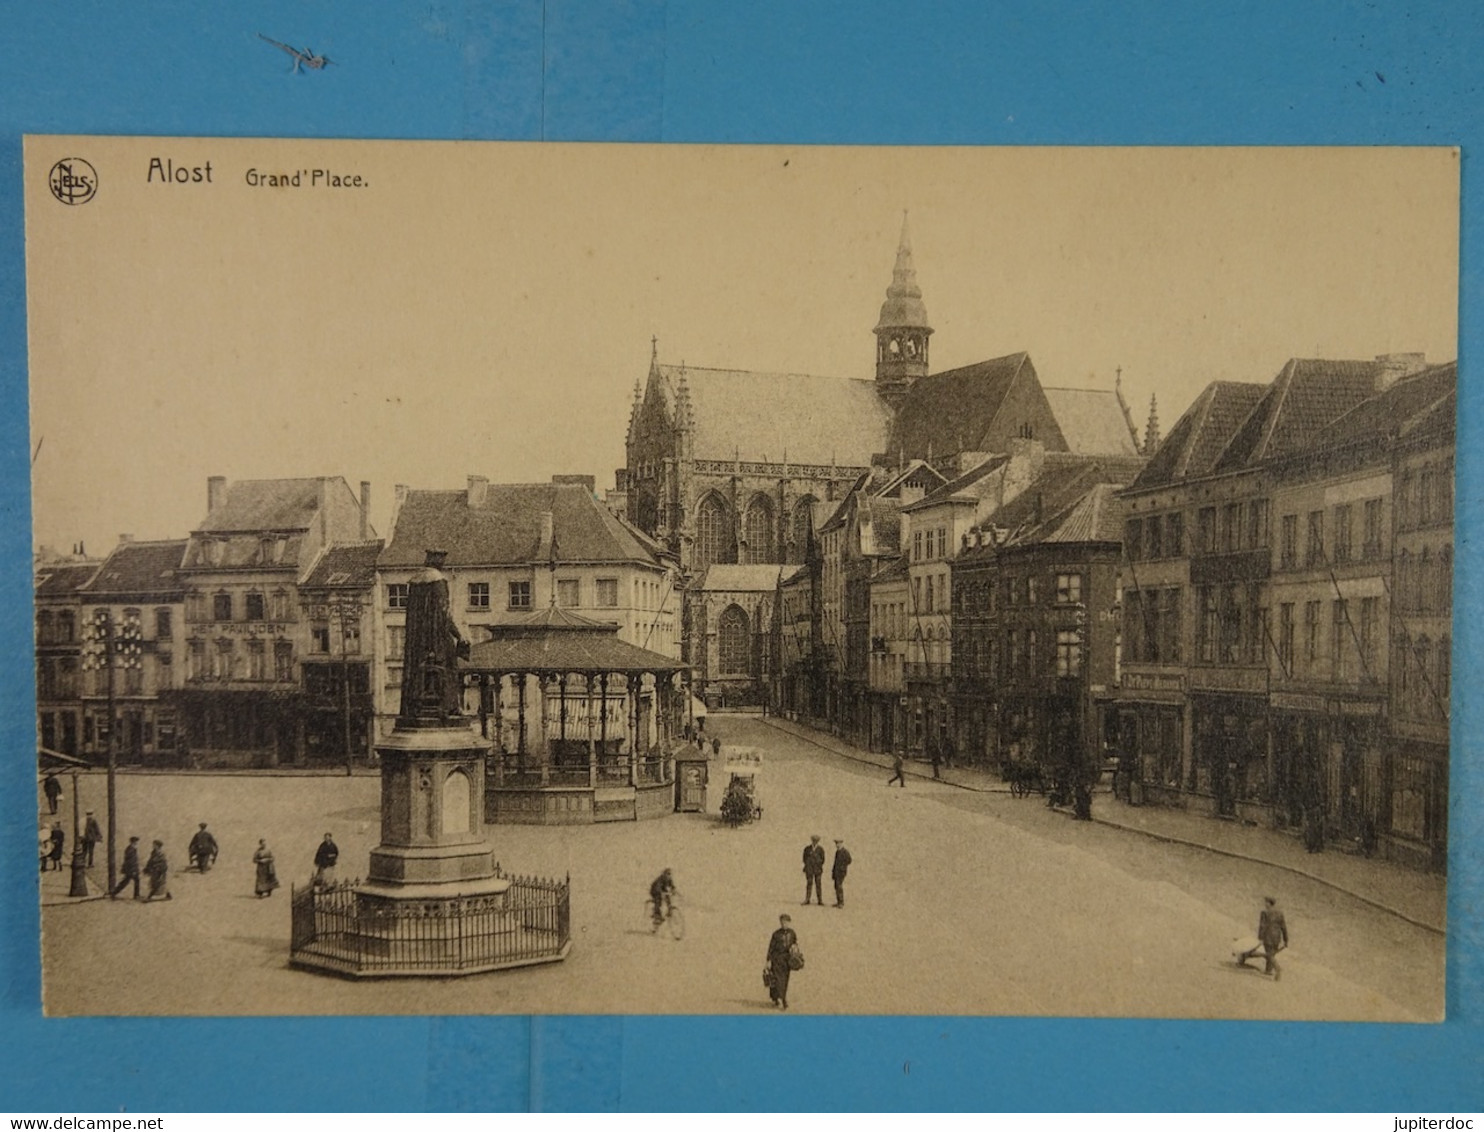 Alost Grand'Place - Aalst